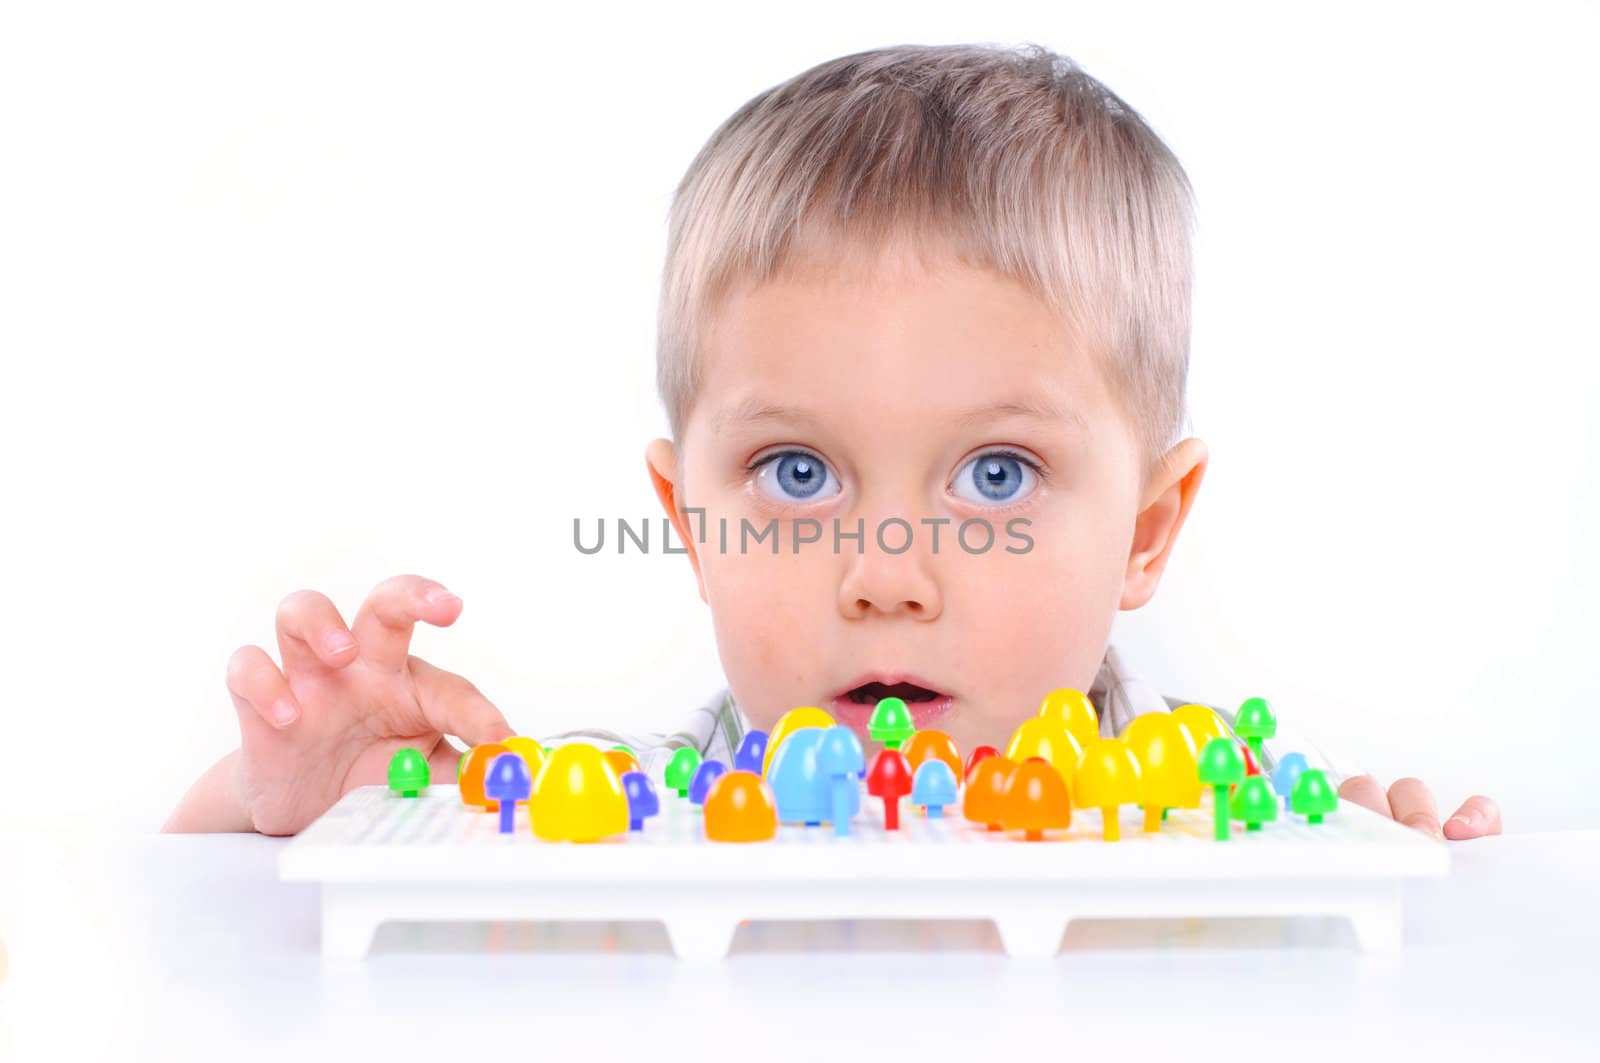 little boy playing with multicolored mosaic isolated on a white background